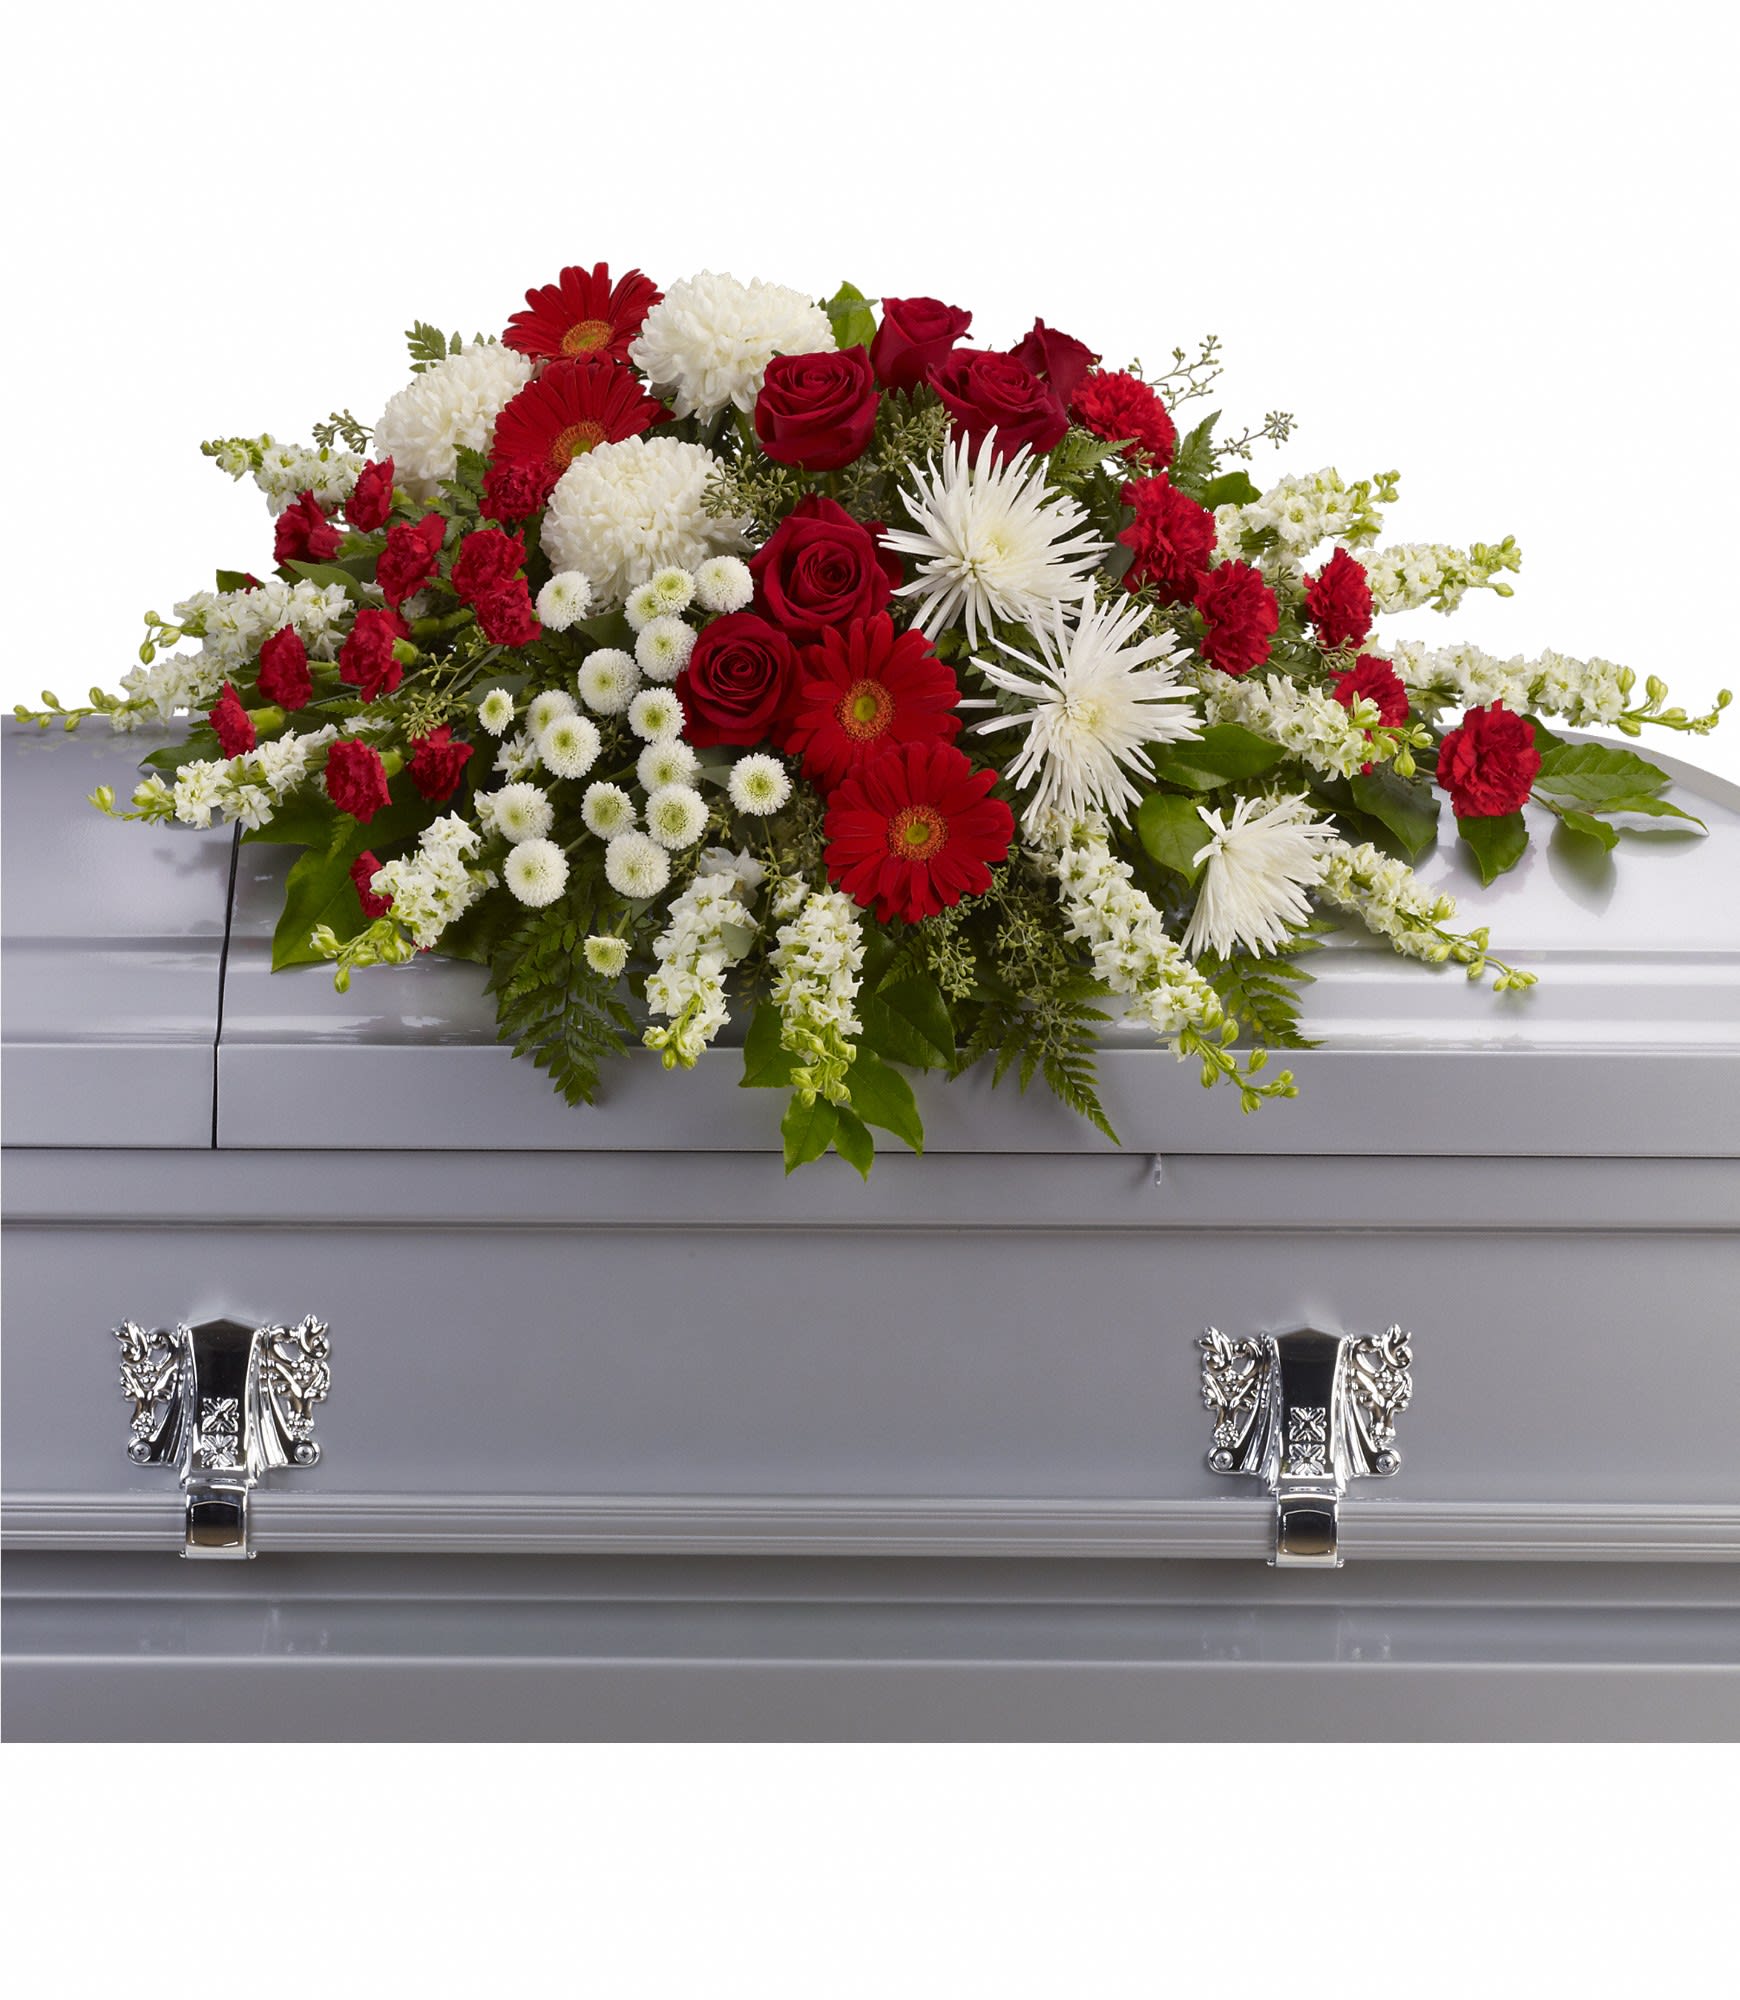 Strength and Wisdom Casket Spray - This beautiful red and white spray will deliver strength and the wisdom to know that there will be brighter days ahead. 